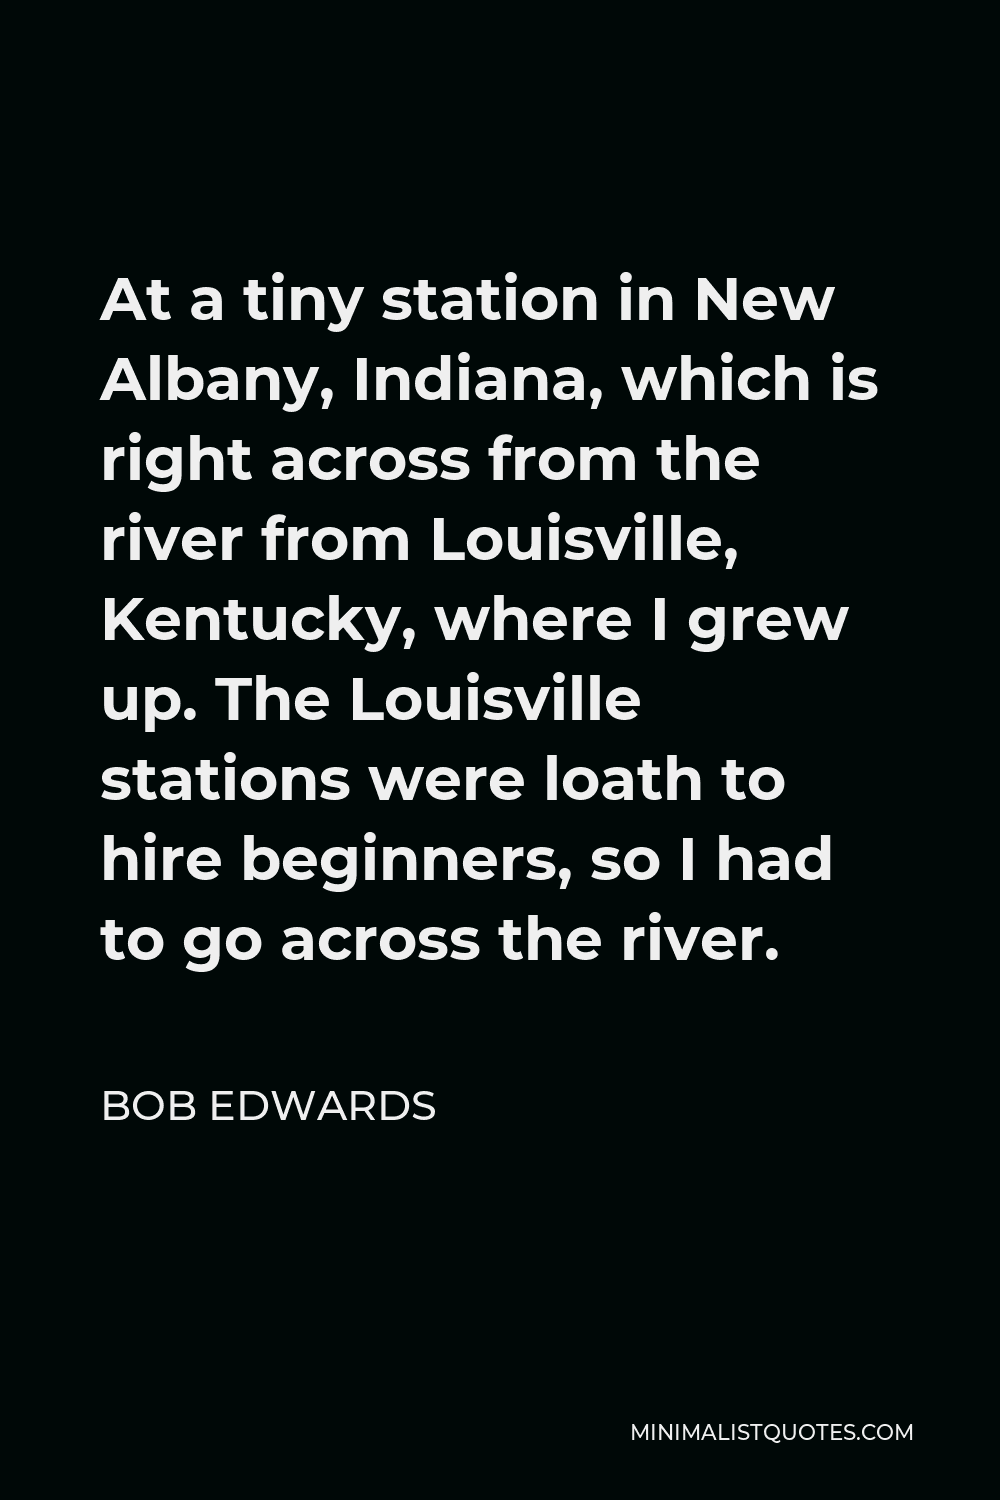 Bob Edwards Quote - At a tiny station in New Albany, Indiana, which is right across from the river from Louisville, Kentucky, where I grew up. The Louisville stations were loath to hire beginners, so I had to go across the river.